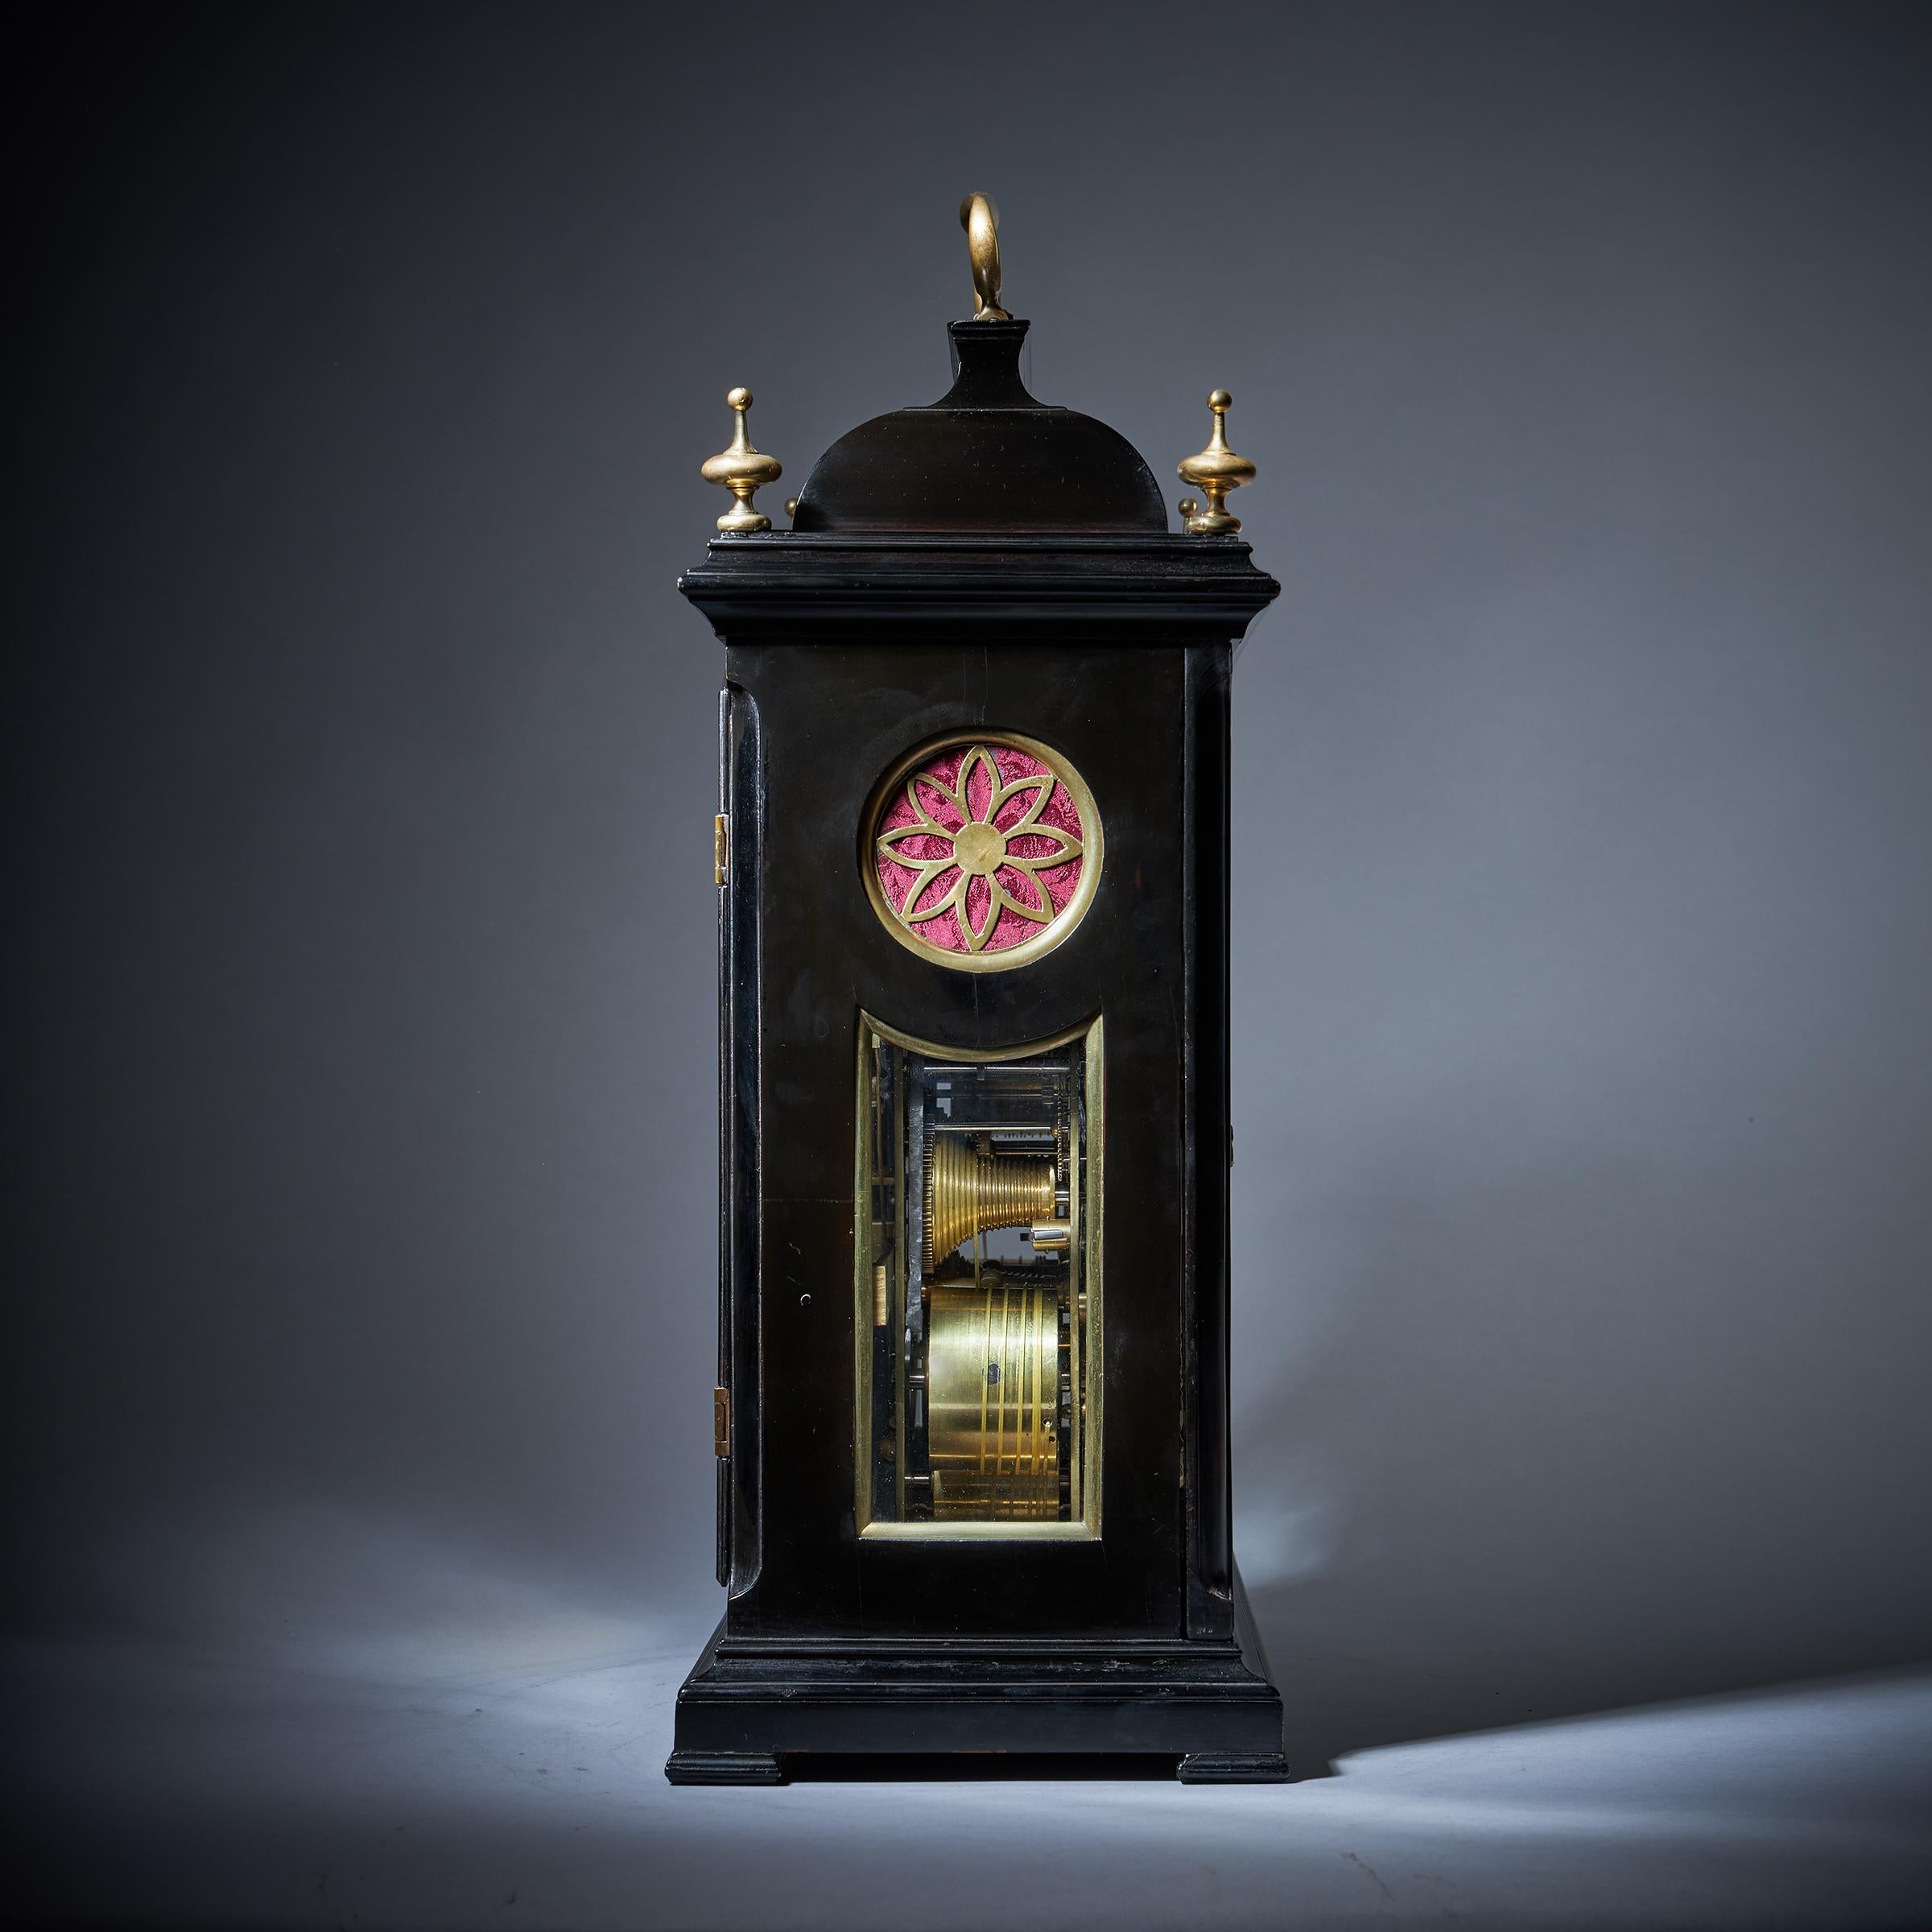 A Rare 18th Century George II Musical Table Clock by Matthew King, c. 1735. 6